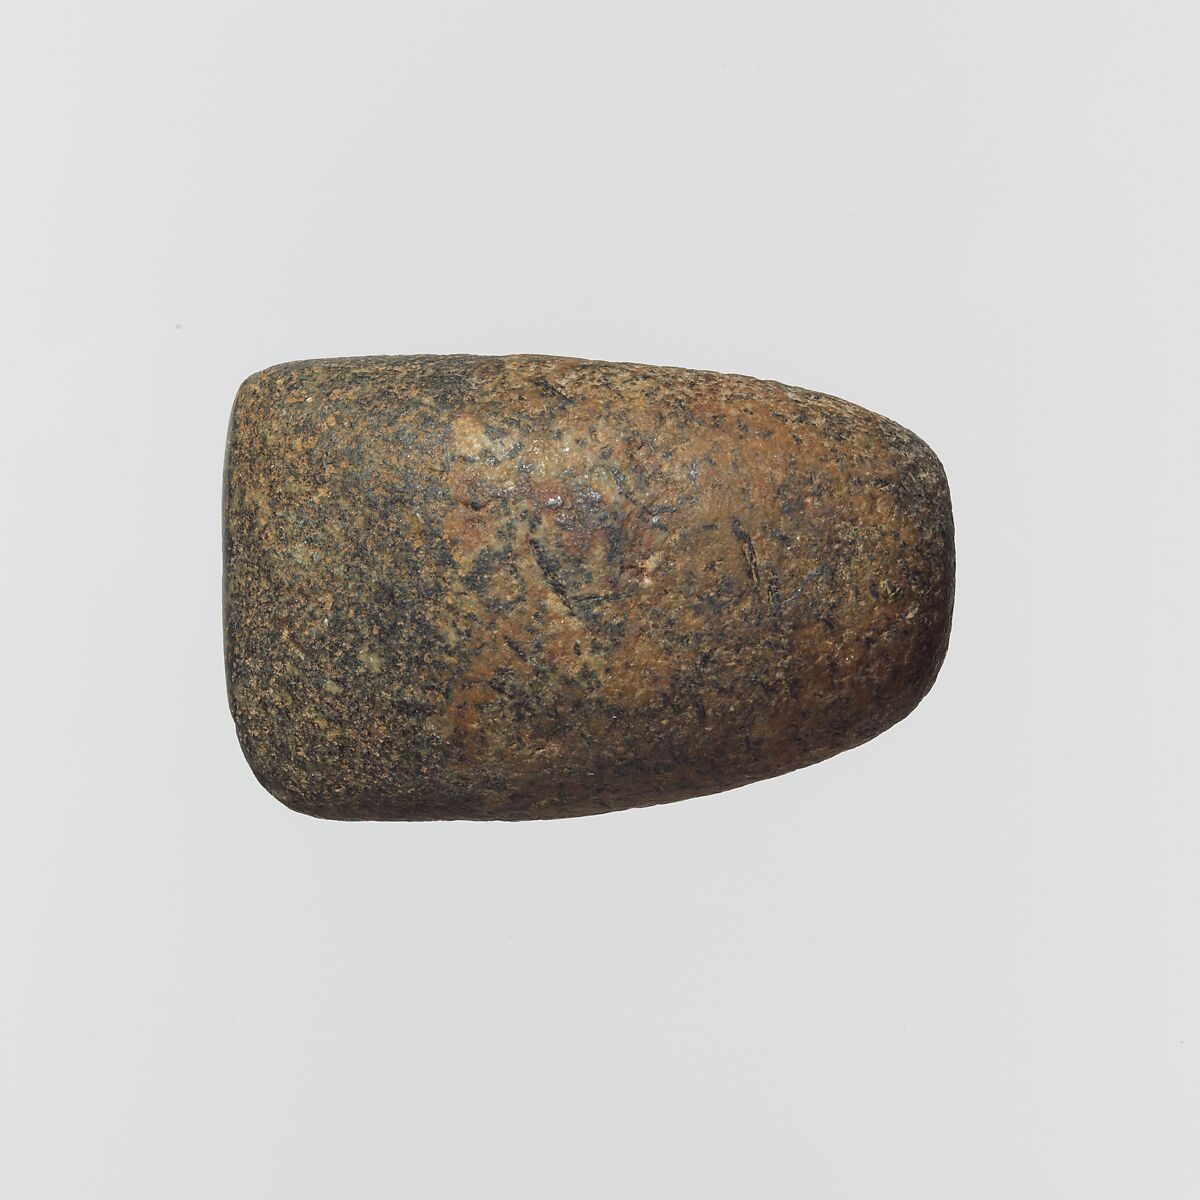 Small stone axe, Stone, Greek Neolithic 